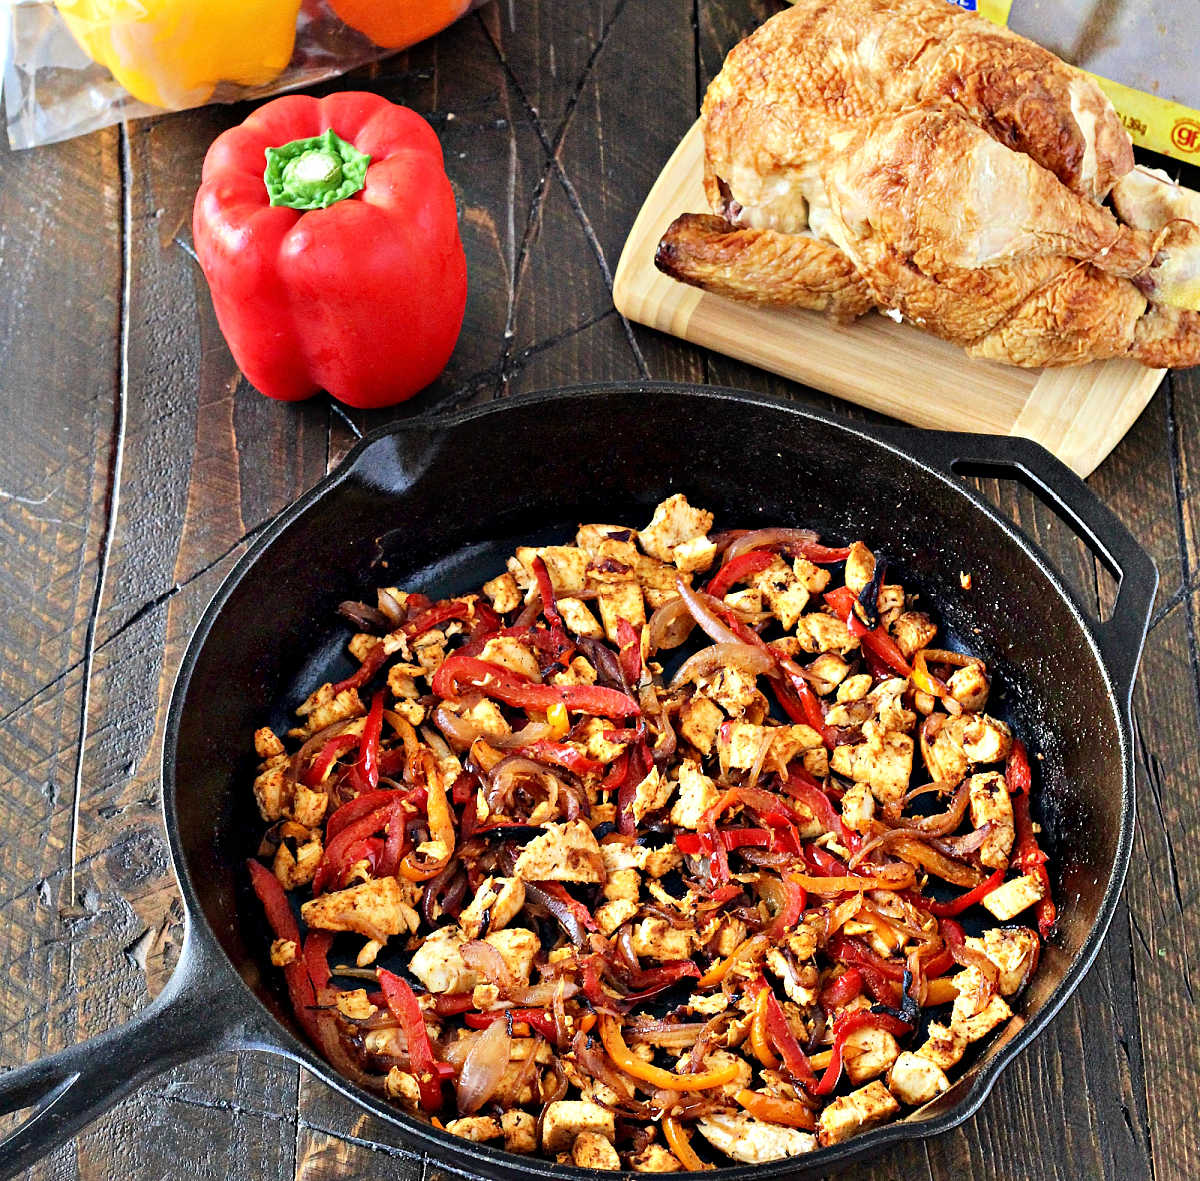 Chicken and bell peppers in a cast iron skillet.